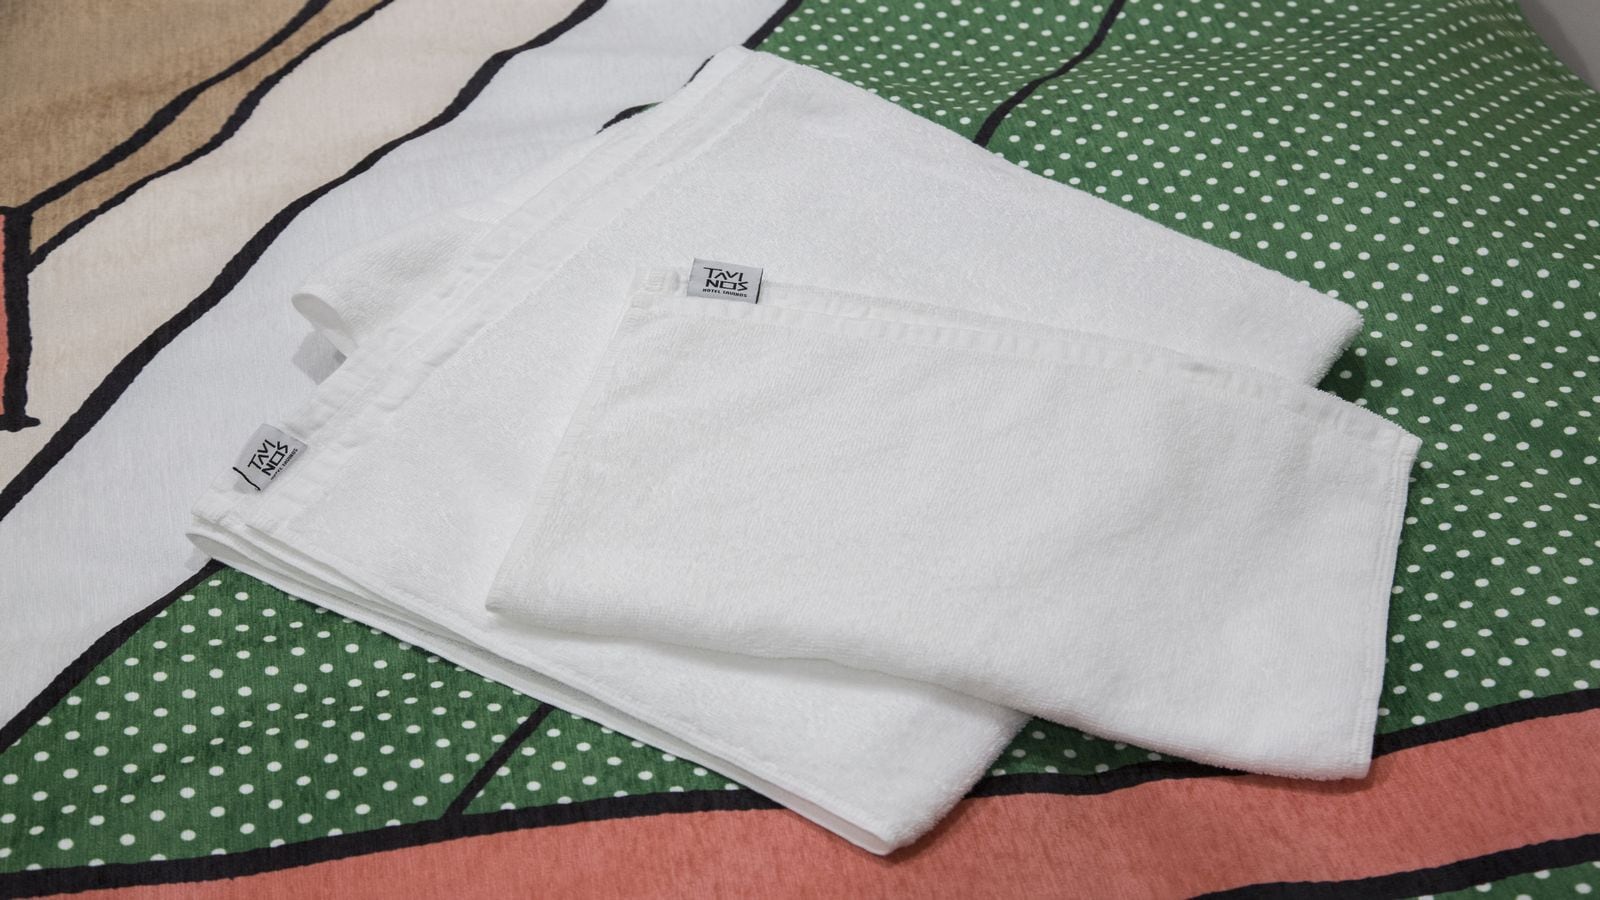 [Amenity] One bath towel and one face towel are provided in the room.